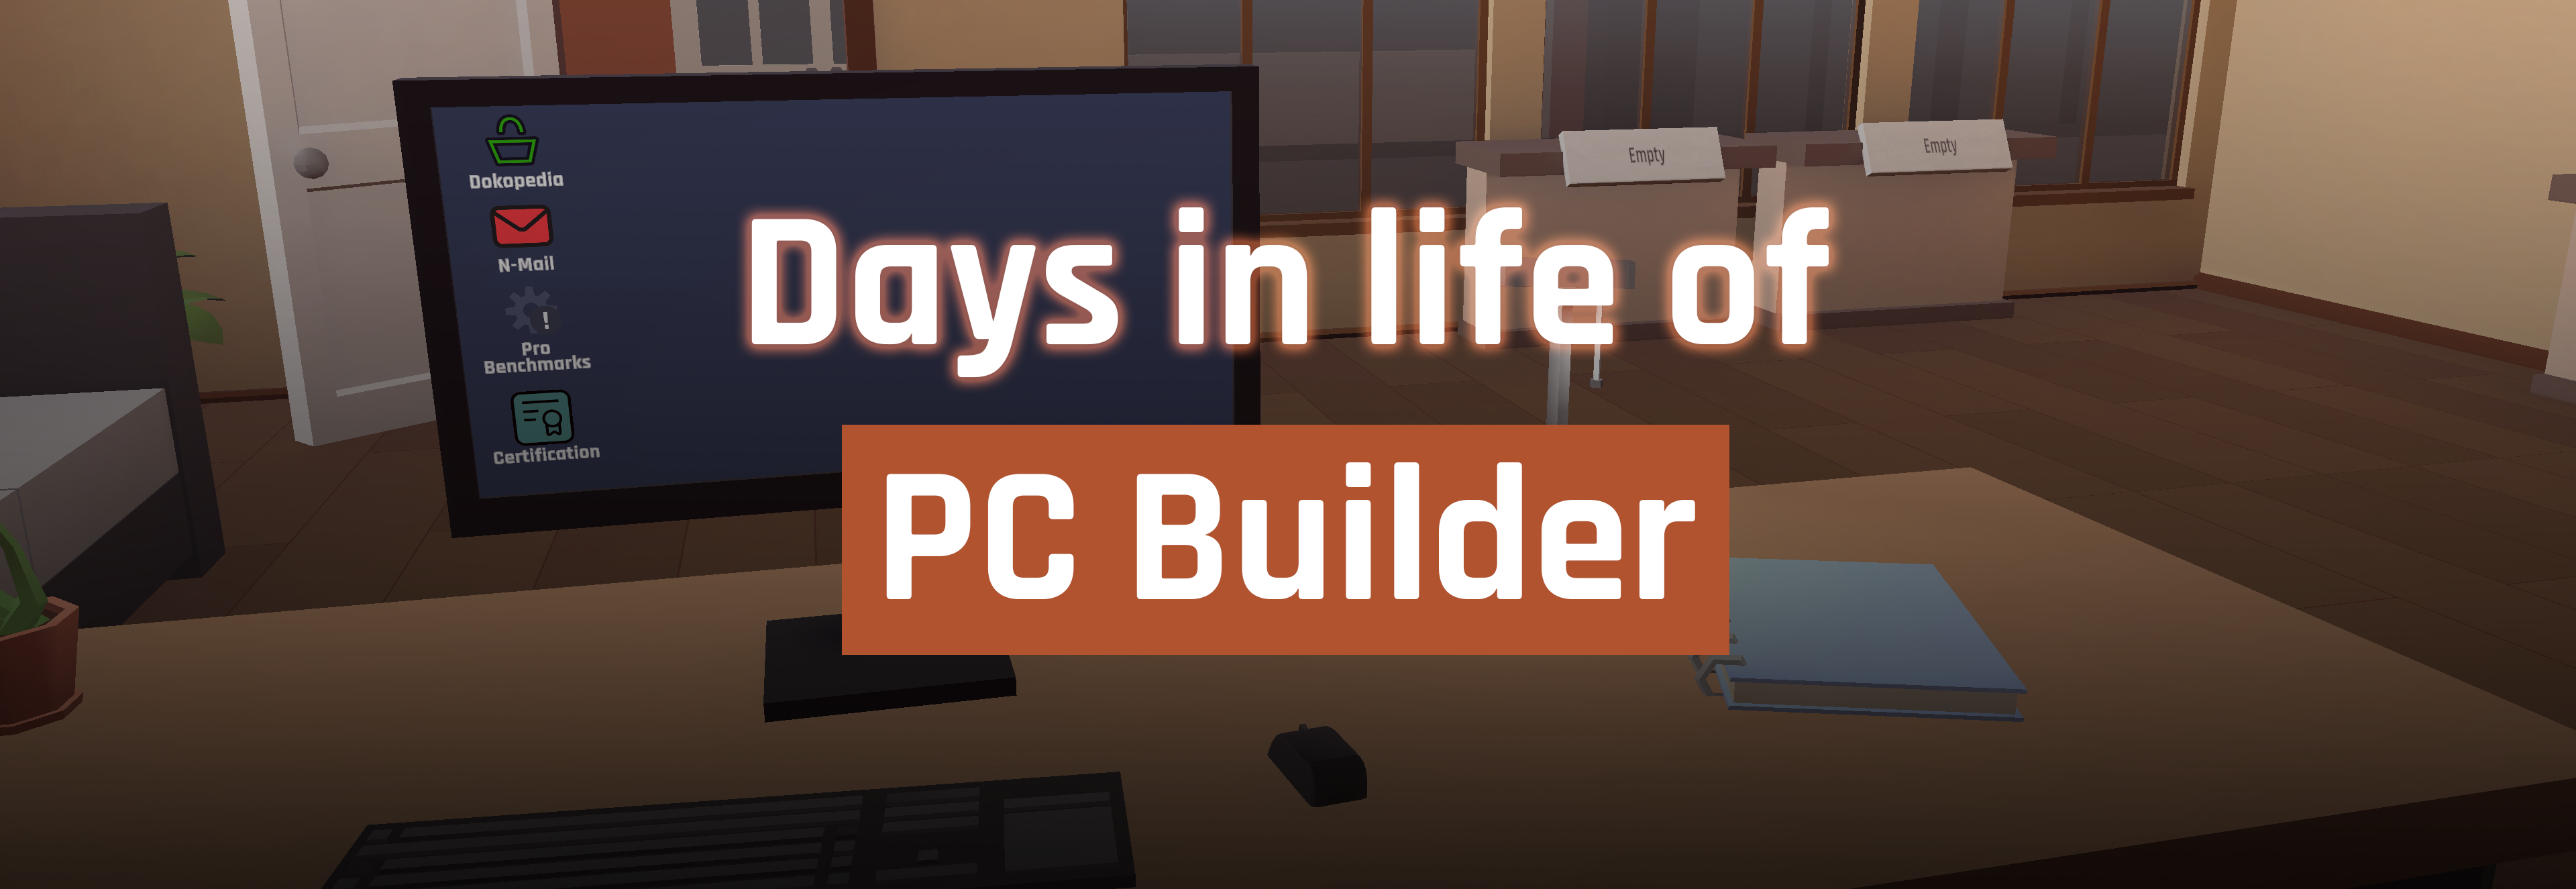 Days in life of PC Builder